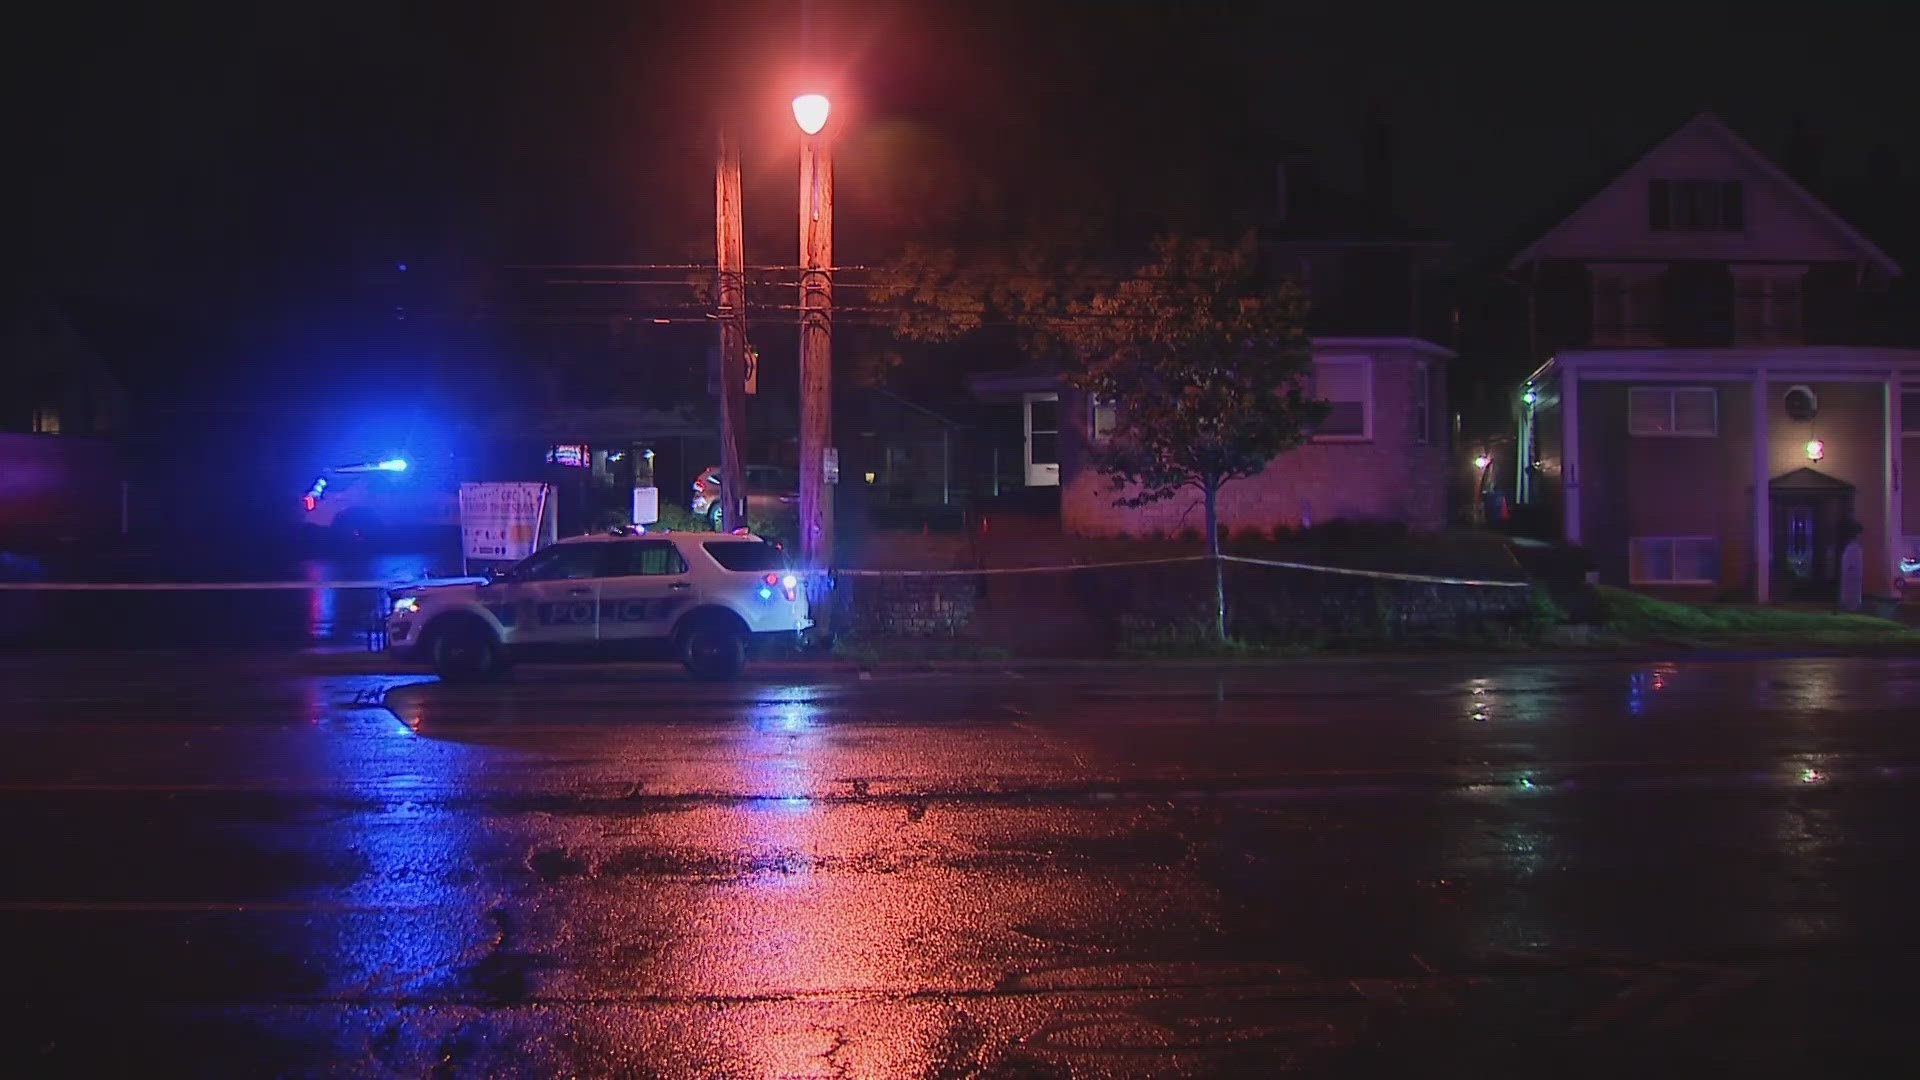 The Columbus Division of Police said a shooting happened in the 3200 block of North High Street around 9:20 p.m.